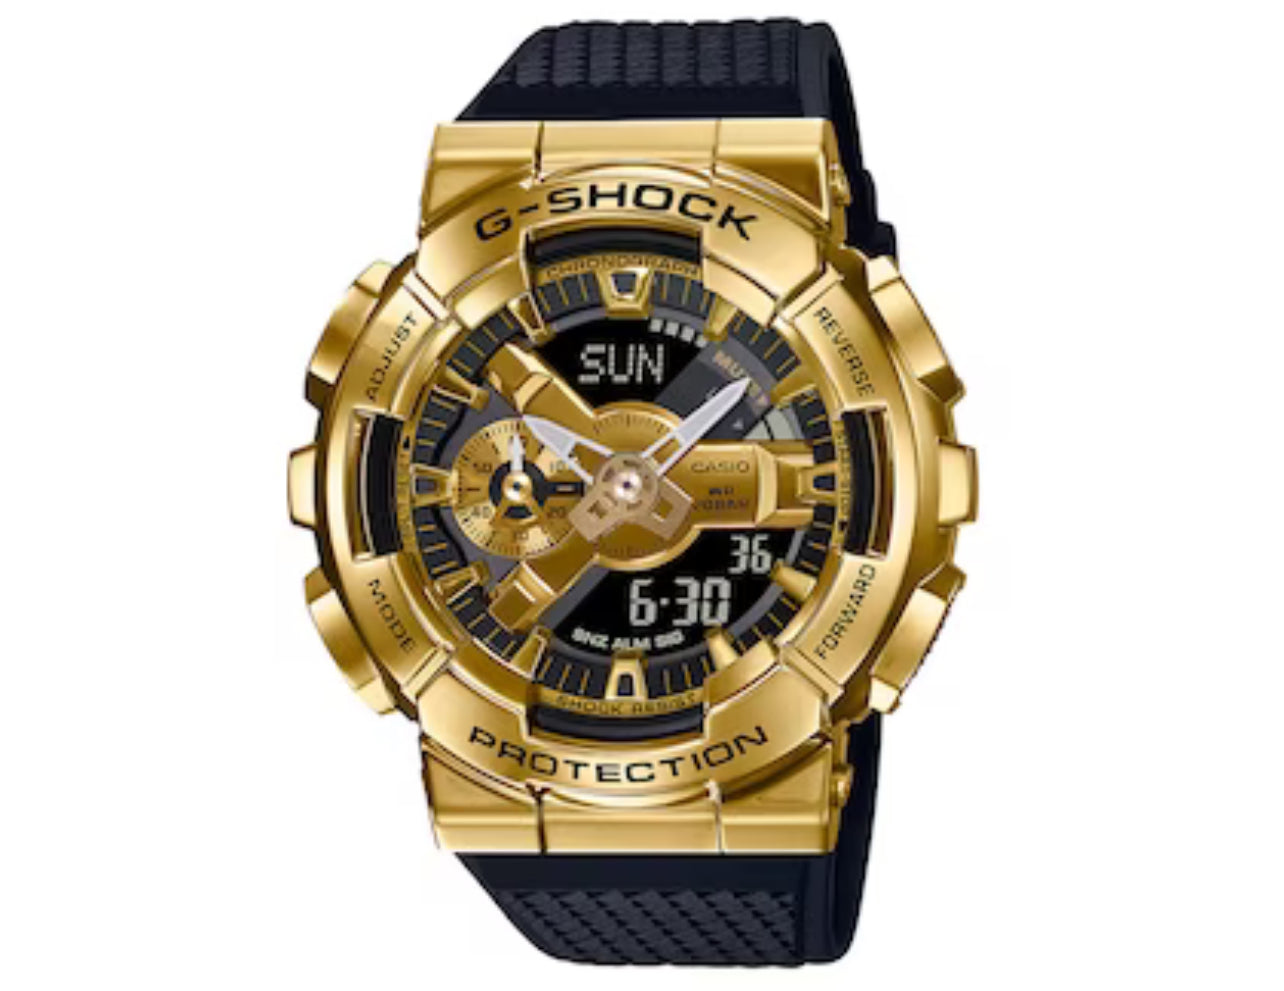 Men's Casio G-Shock Classic Gold-Tone Black Resin Strap Watch with Black and Gold-Tone Dial